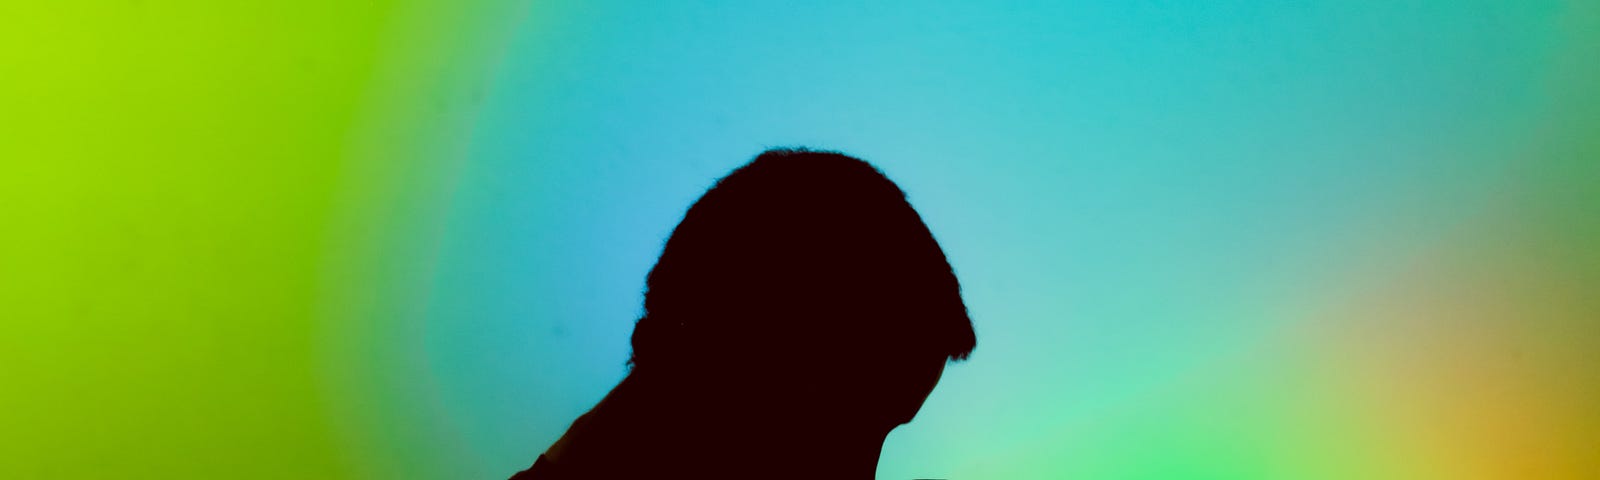 Silhouette of man thinking with bright, abstract colors in the background.